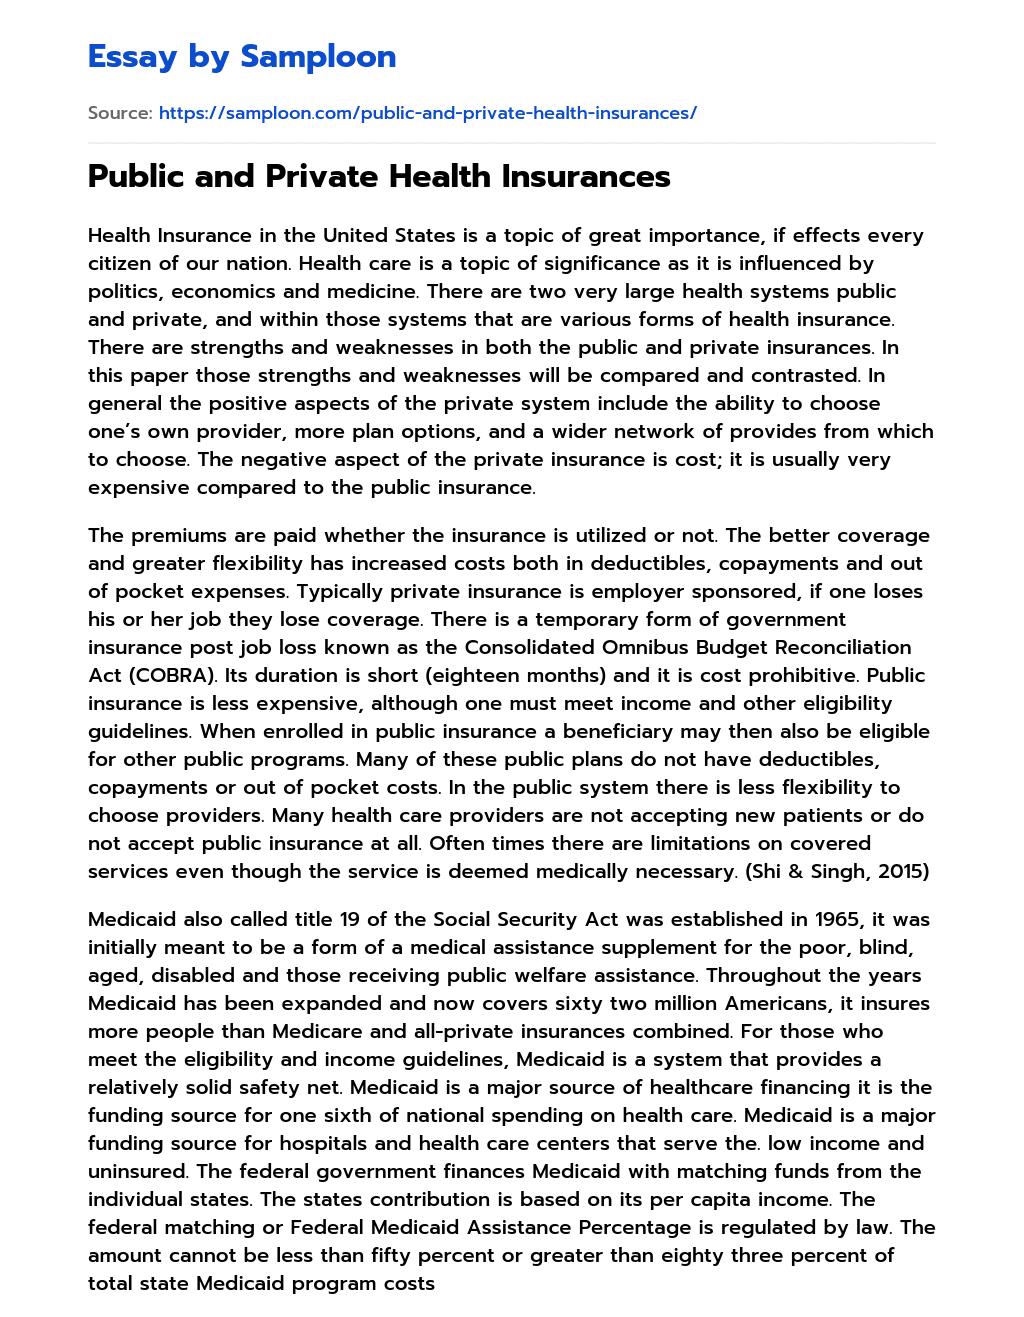 write an essay about health insurance